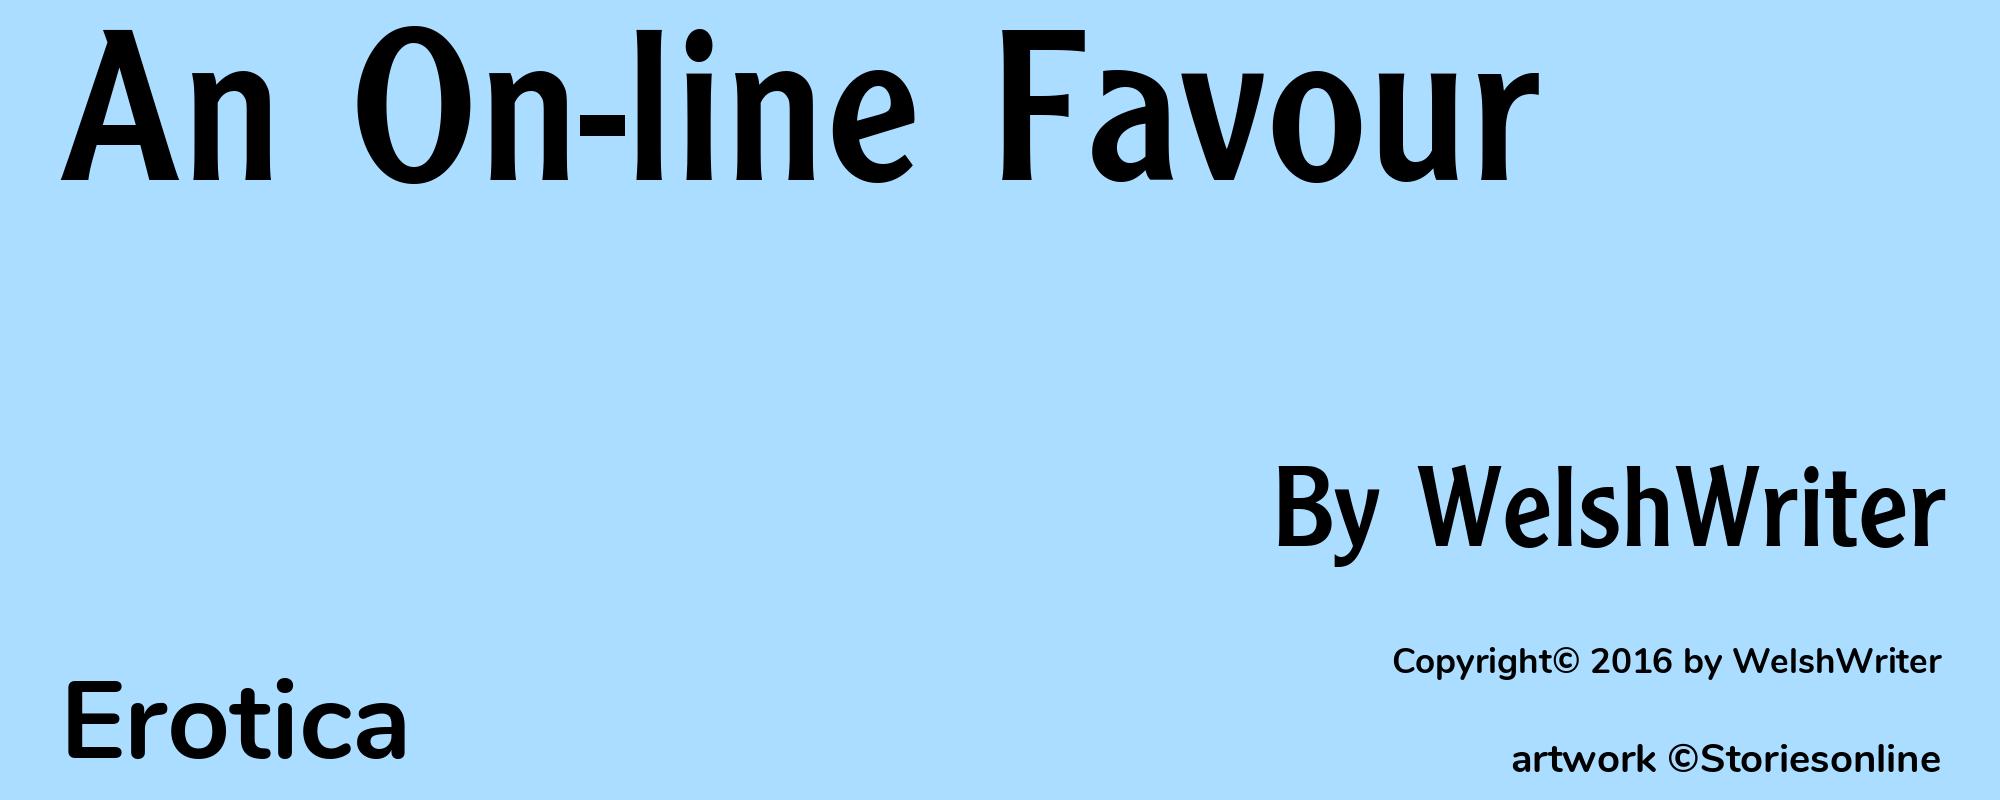 An On-line Favour - Cover